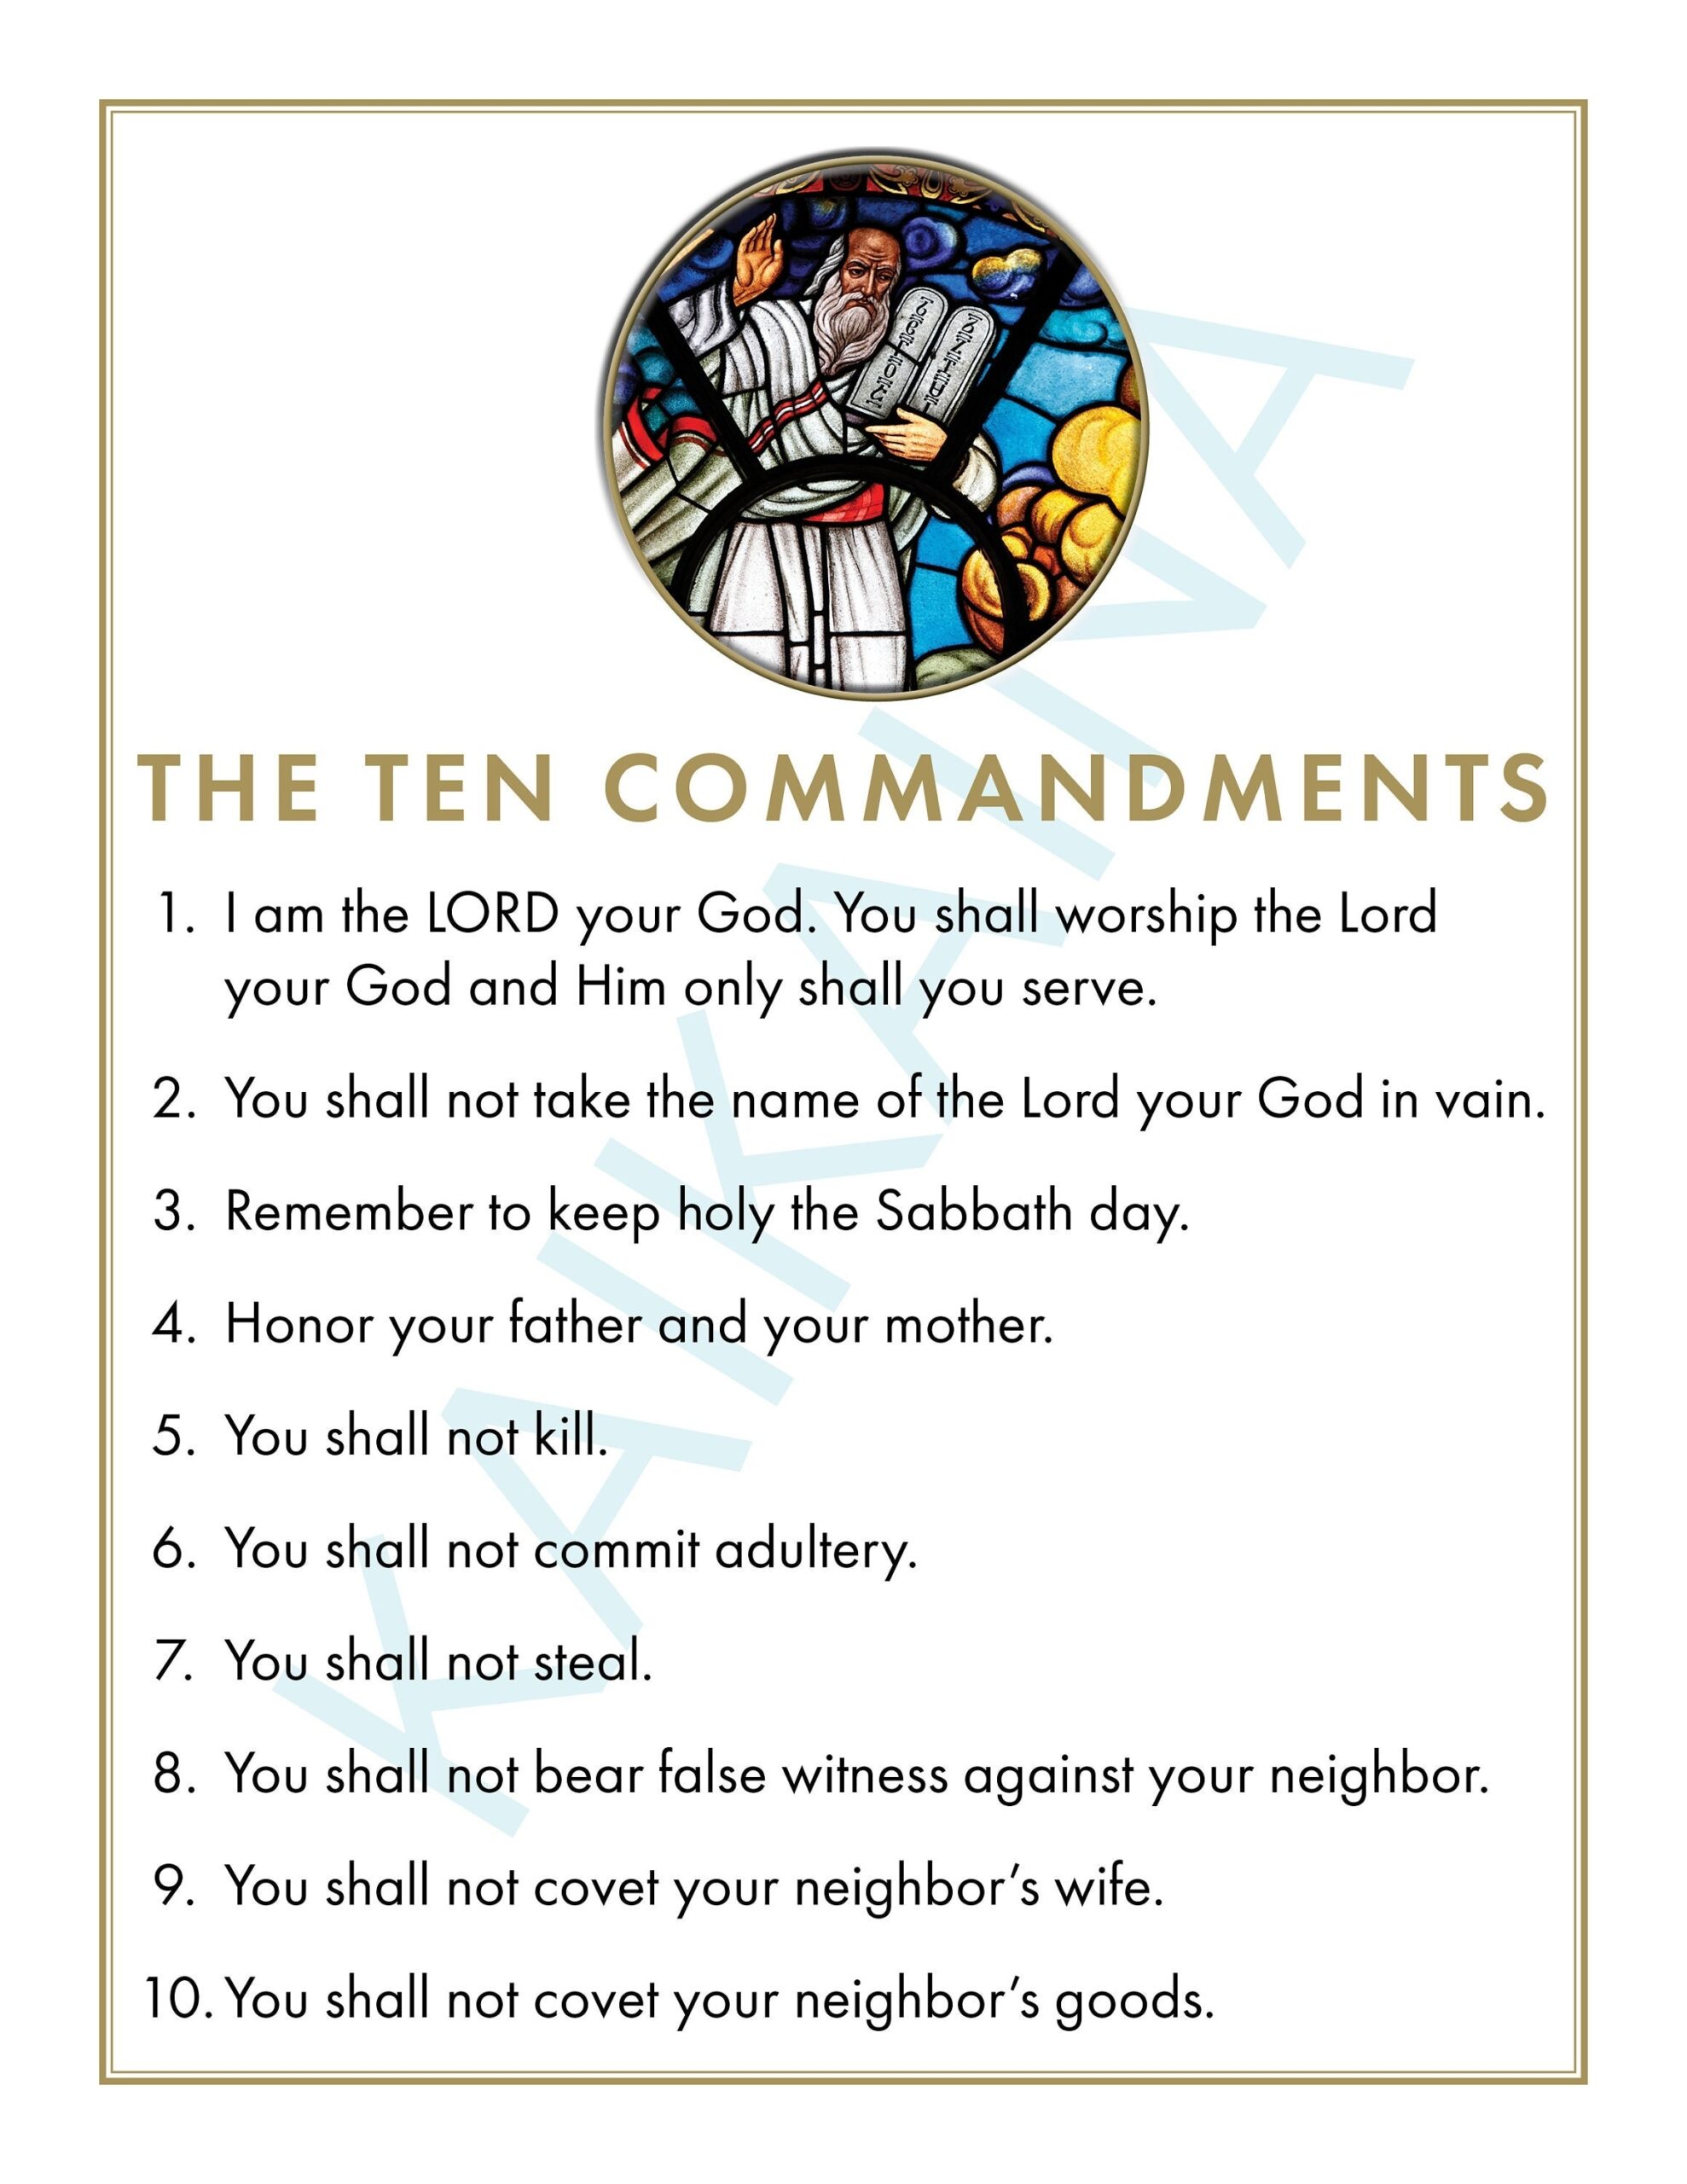 Ten Commandments Catholic Poster For Children 8 5 X 11 Poster Downloadable And Printable Catholic Etsy